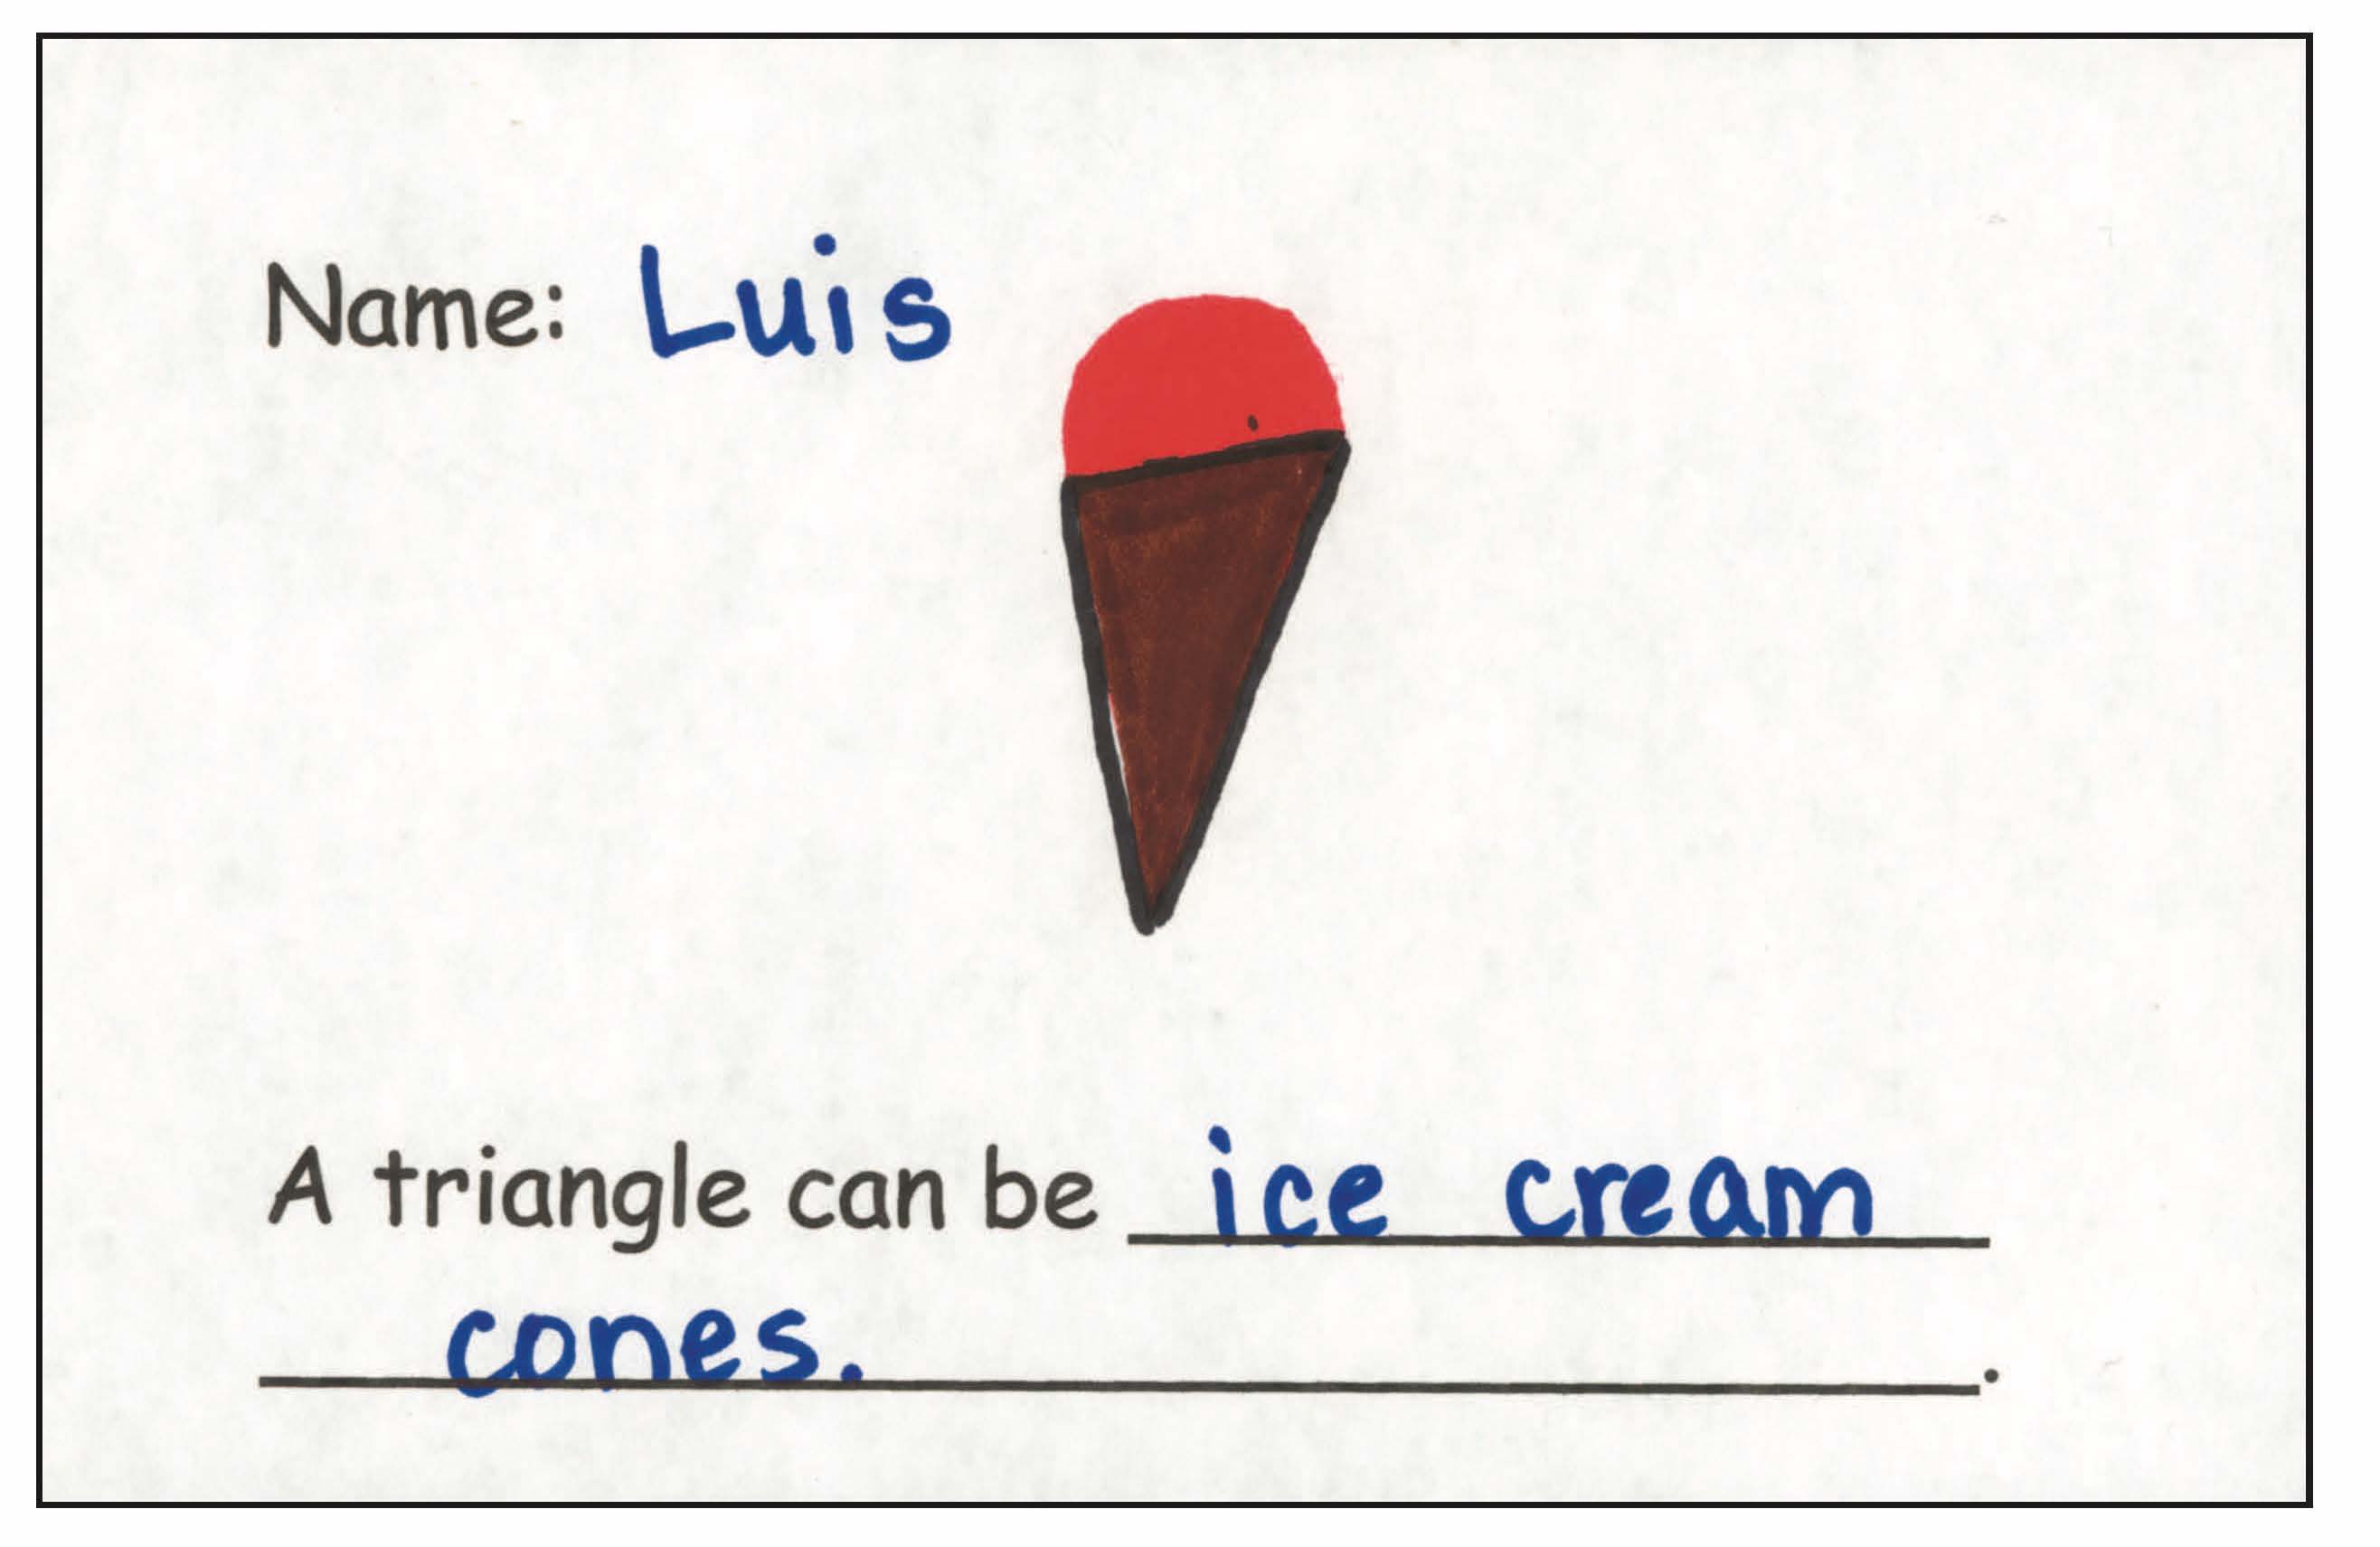 Figure 2. Luis used one triangle to make an ice-cream cone.